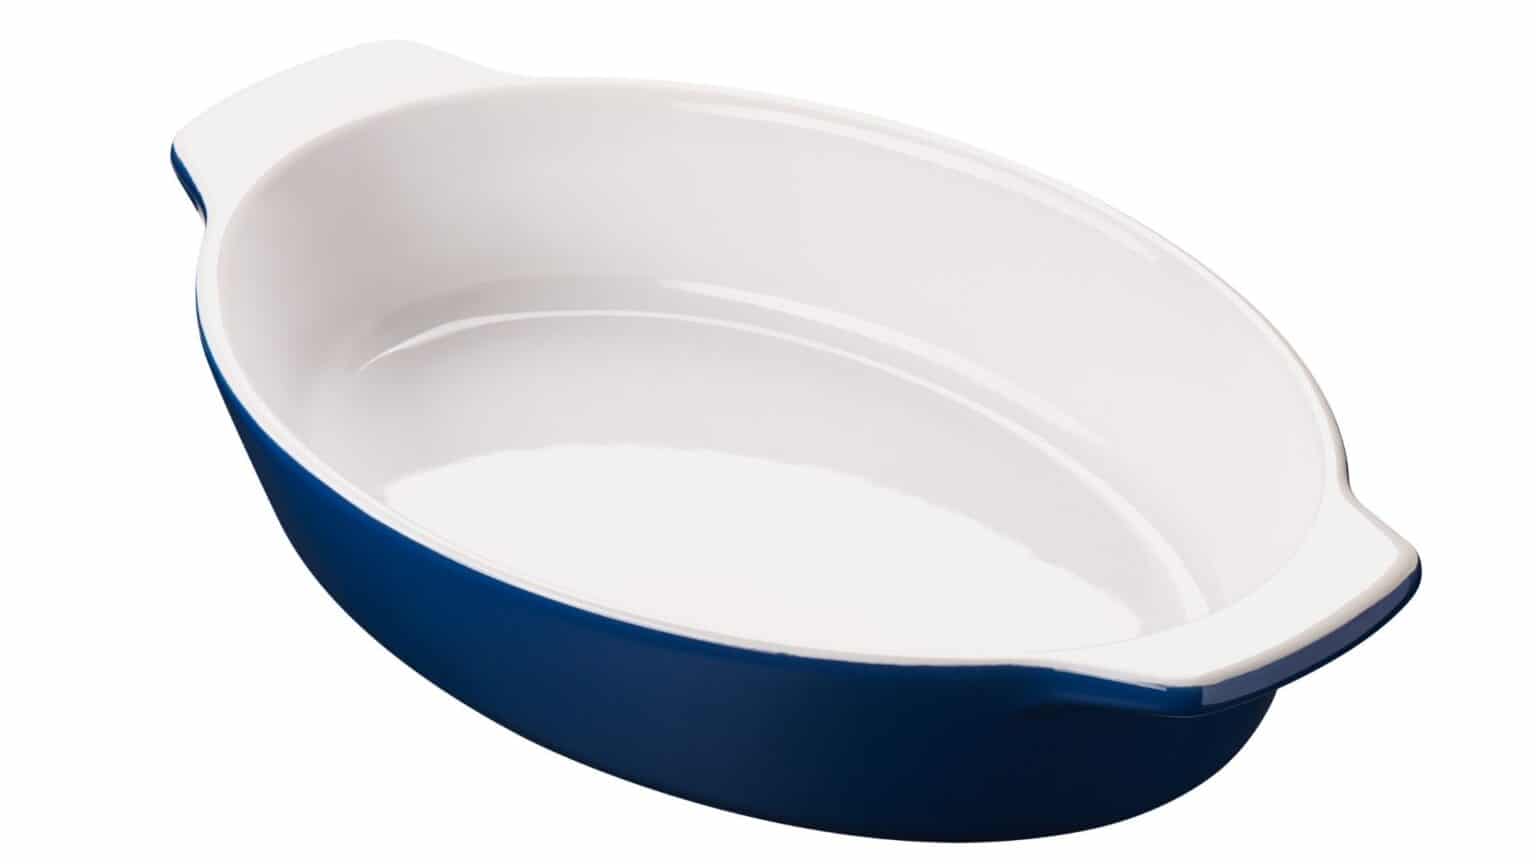 Oval Bakeware